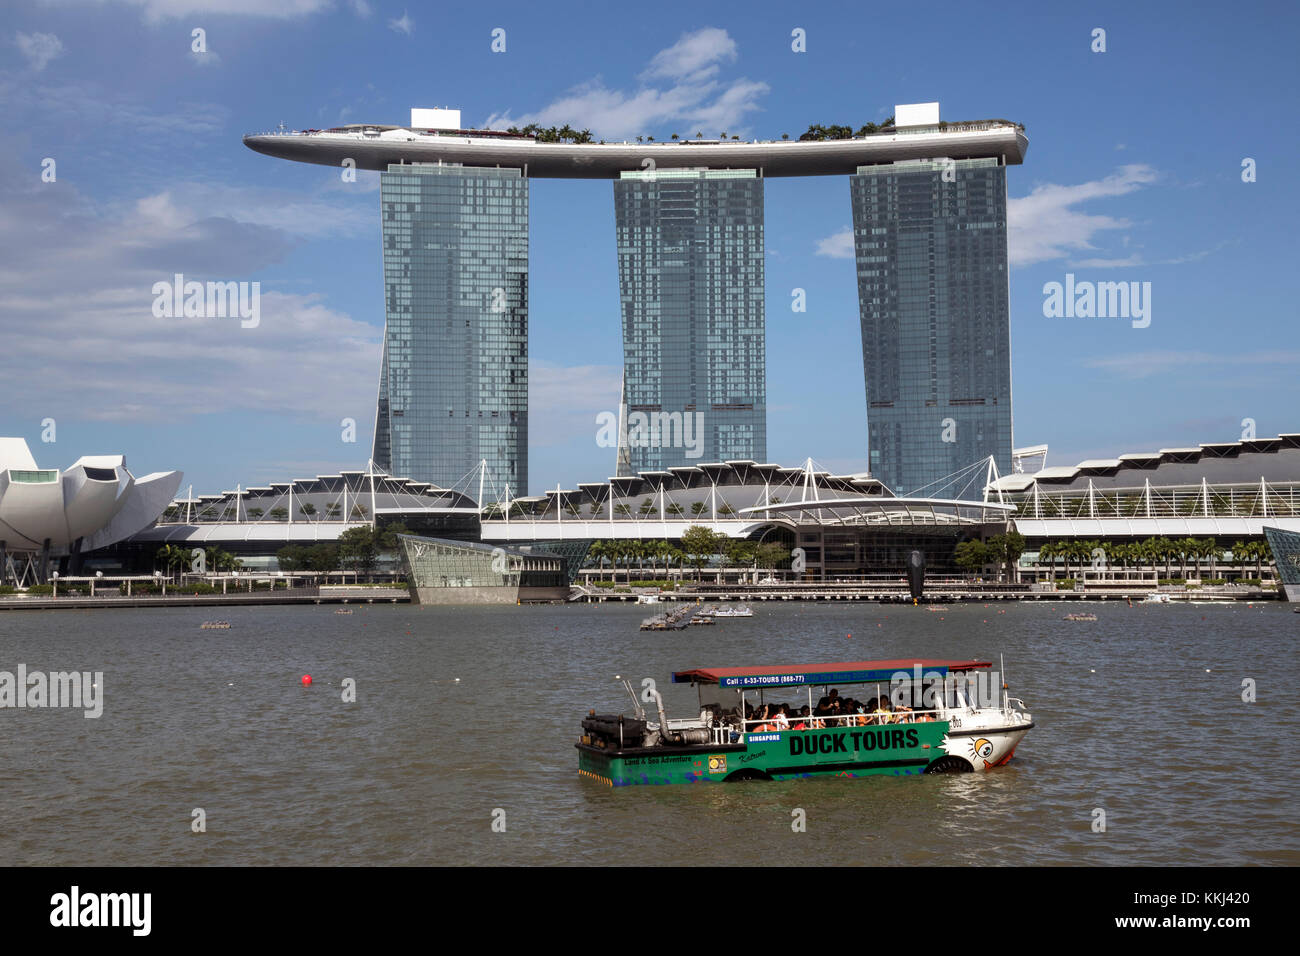 Marina Bay Sands Hotel in Singapore at the mouth of the Singapore River with a Duck tourist boat in the foreground Stock Photo